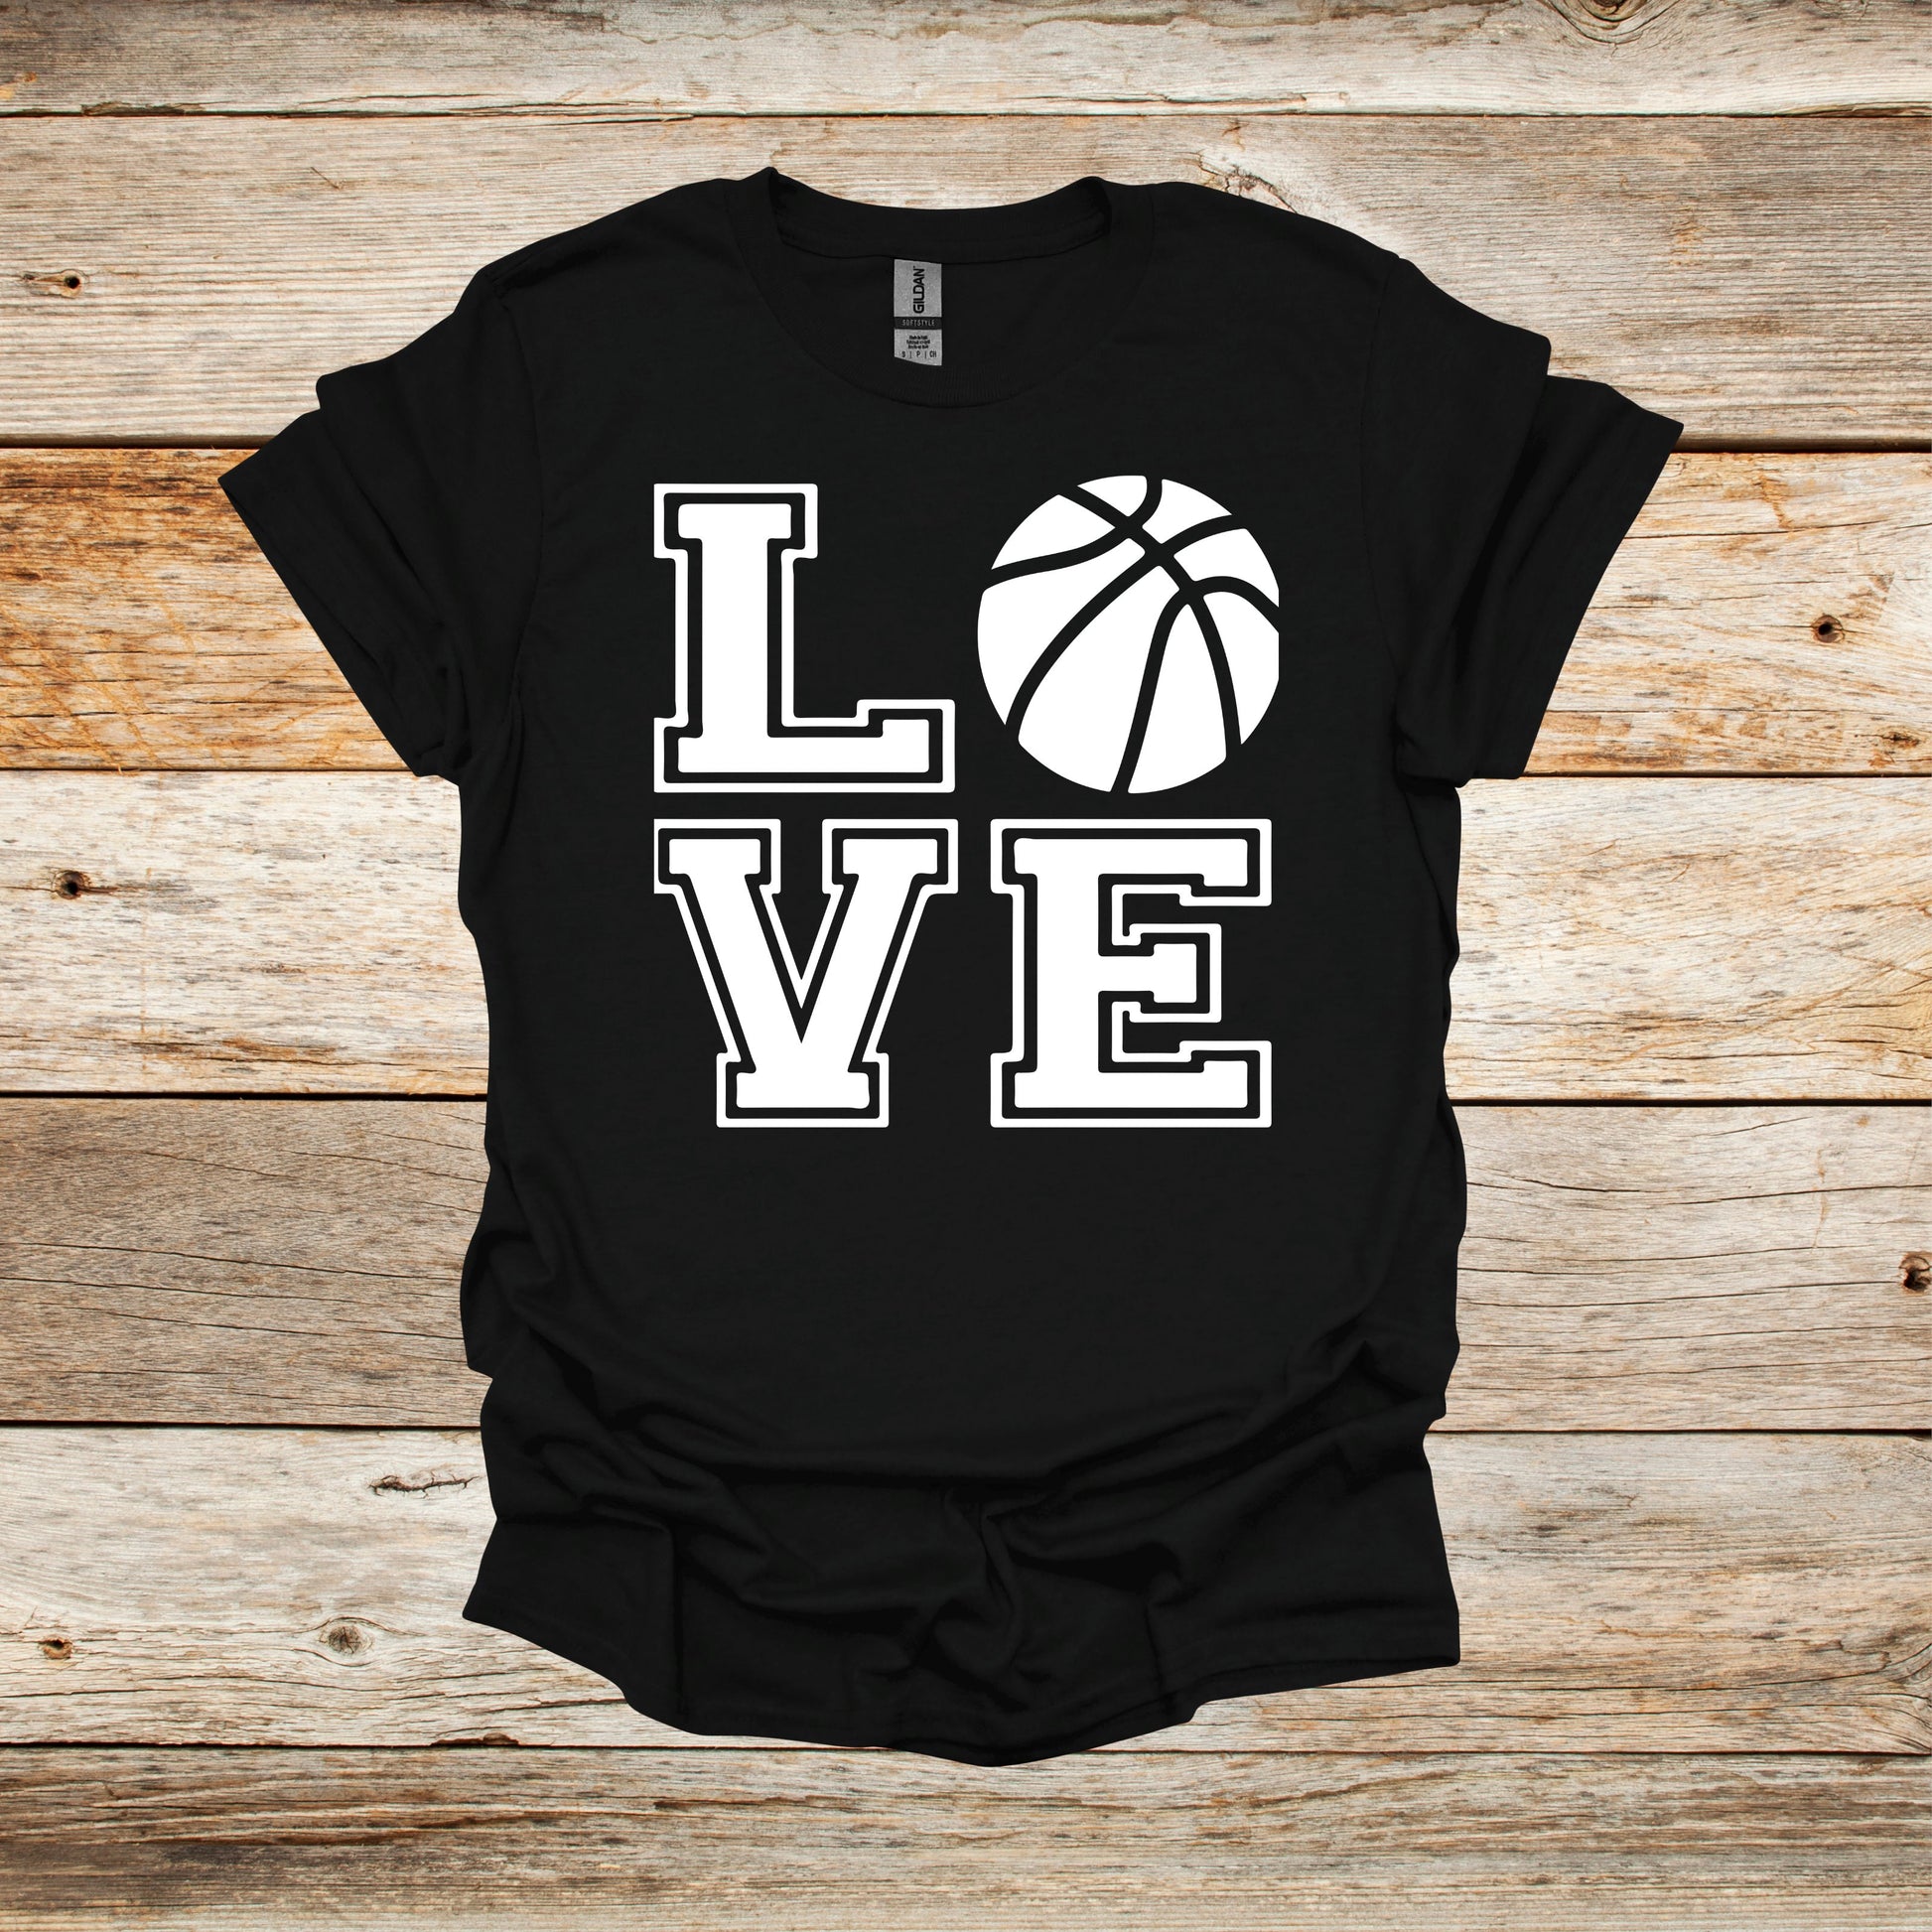 Basketball T-Shirt - Adult and Children's Tee Shirts - Sports T-Shirts Graphic Avenue Black Adult Small 